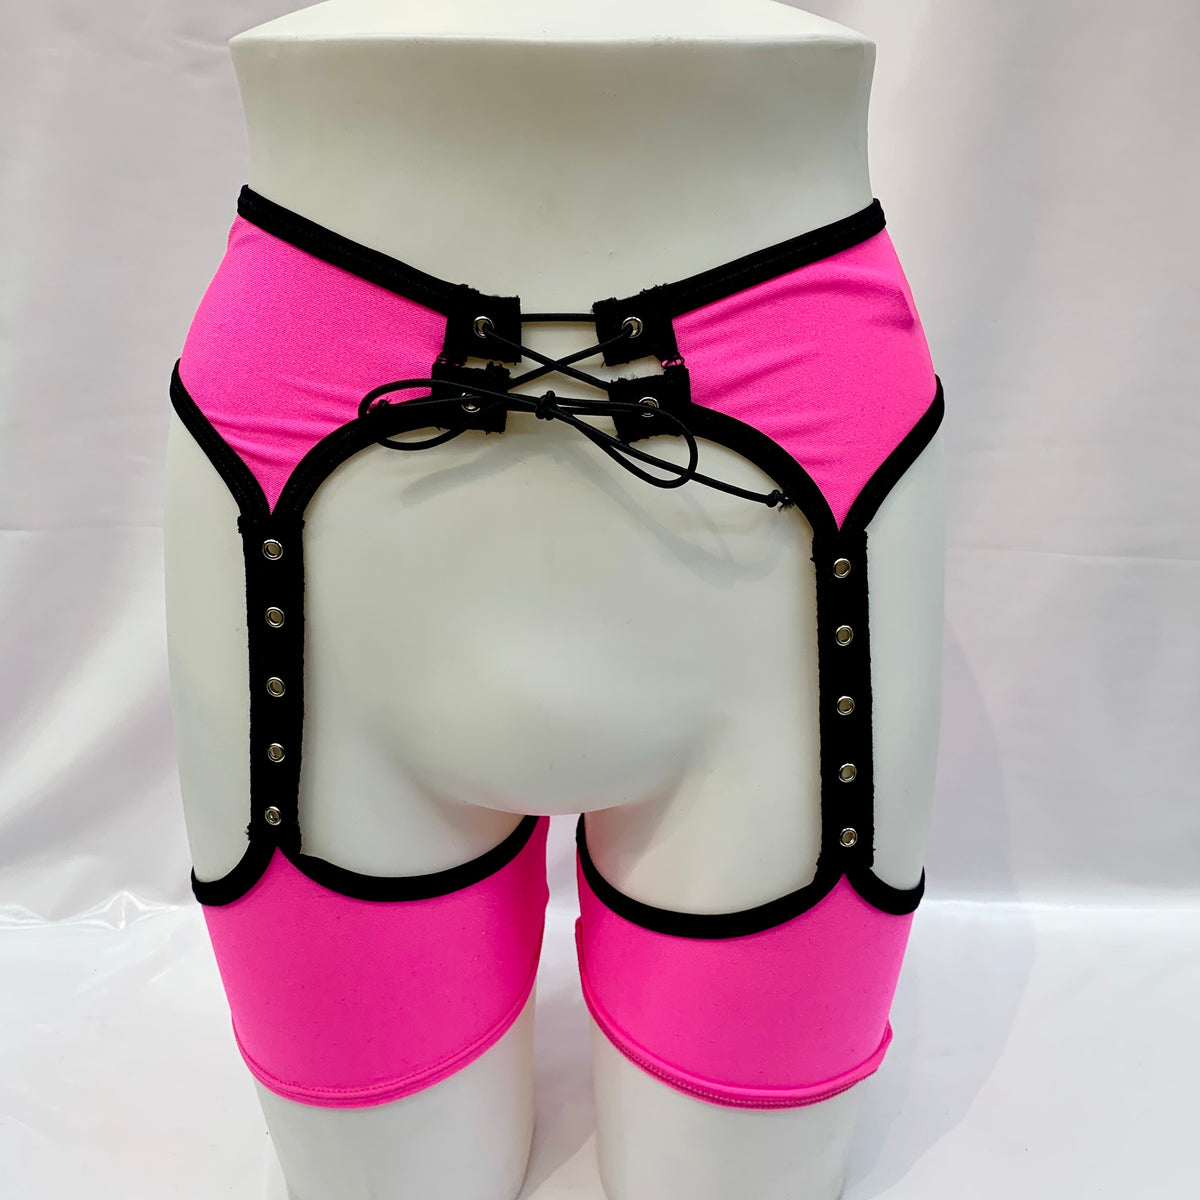 THINK PINK SHORT CHAPS